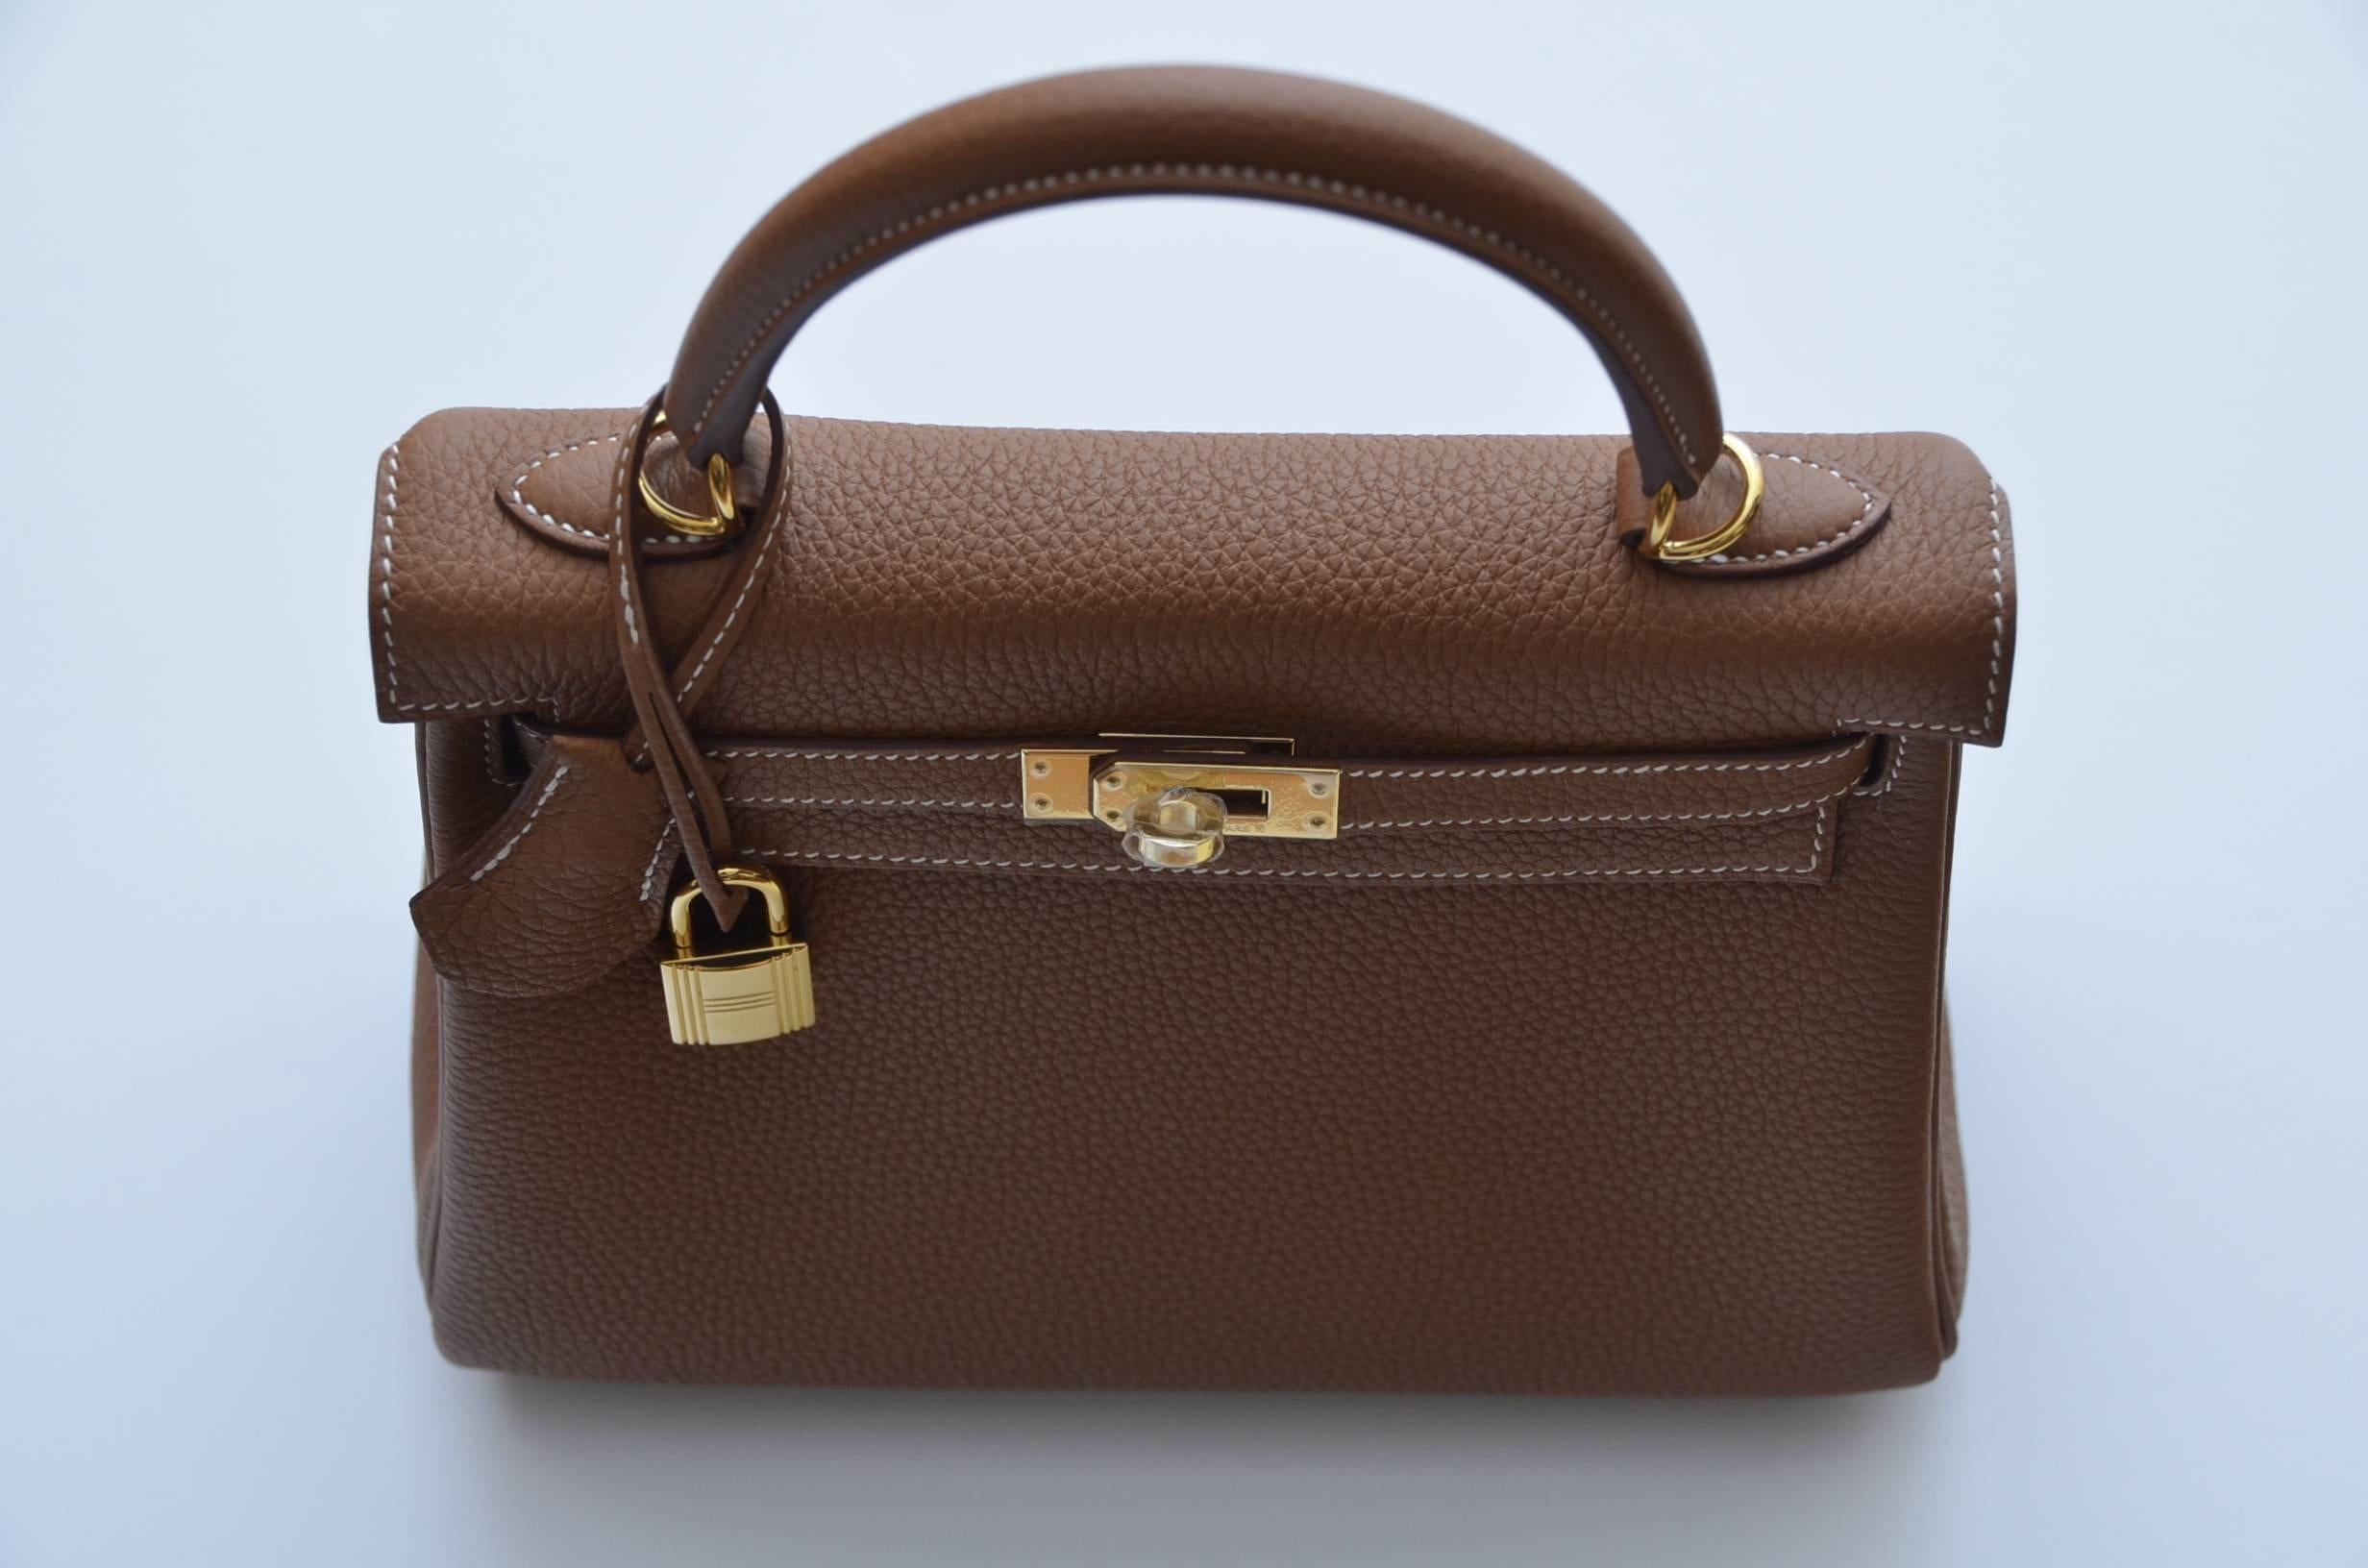 HERMES Kelly II Retourne  Veau Togo Gold color.
Size :25 cm.
Brand new,never used and comes with: Hermes box,dustbag, clochette, lock, two keys, shoulder strap, clochette dust bag,care booklet  and shoulder strap dust-bag.
Hermes color reference